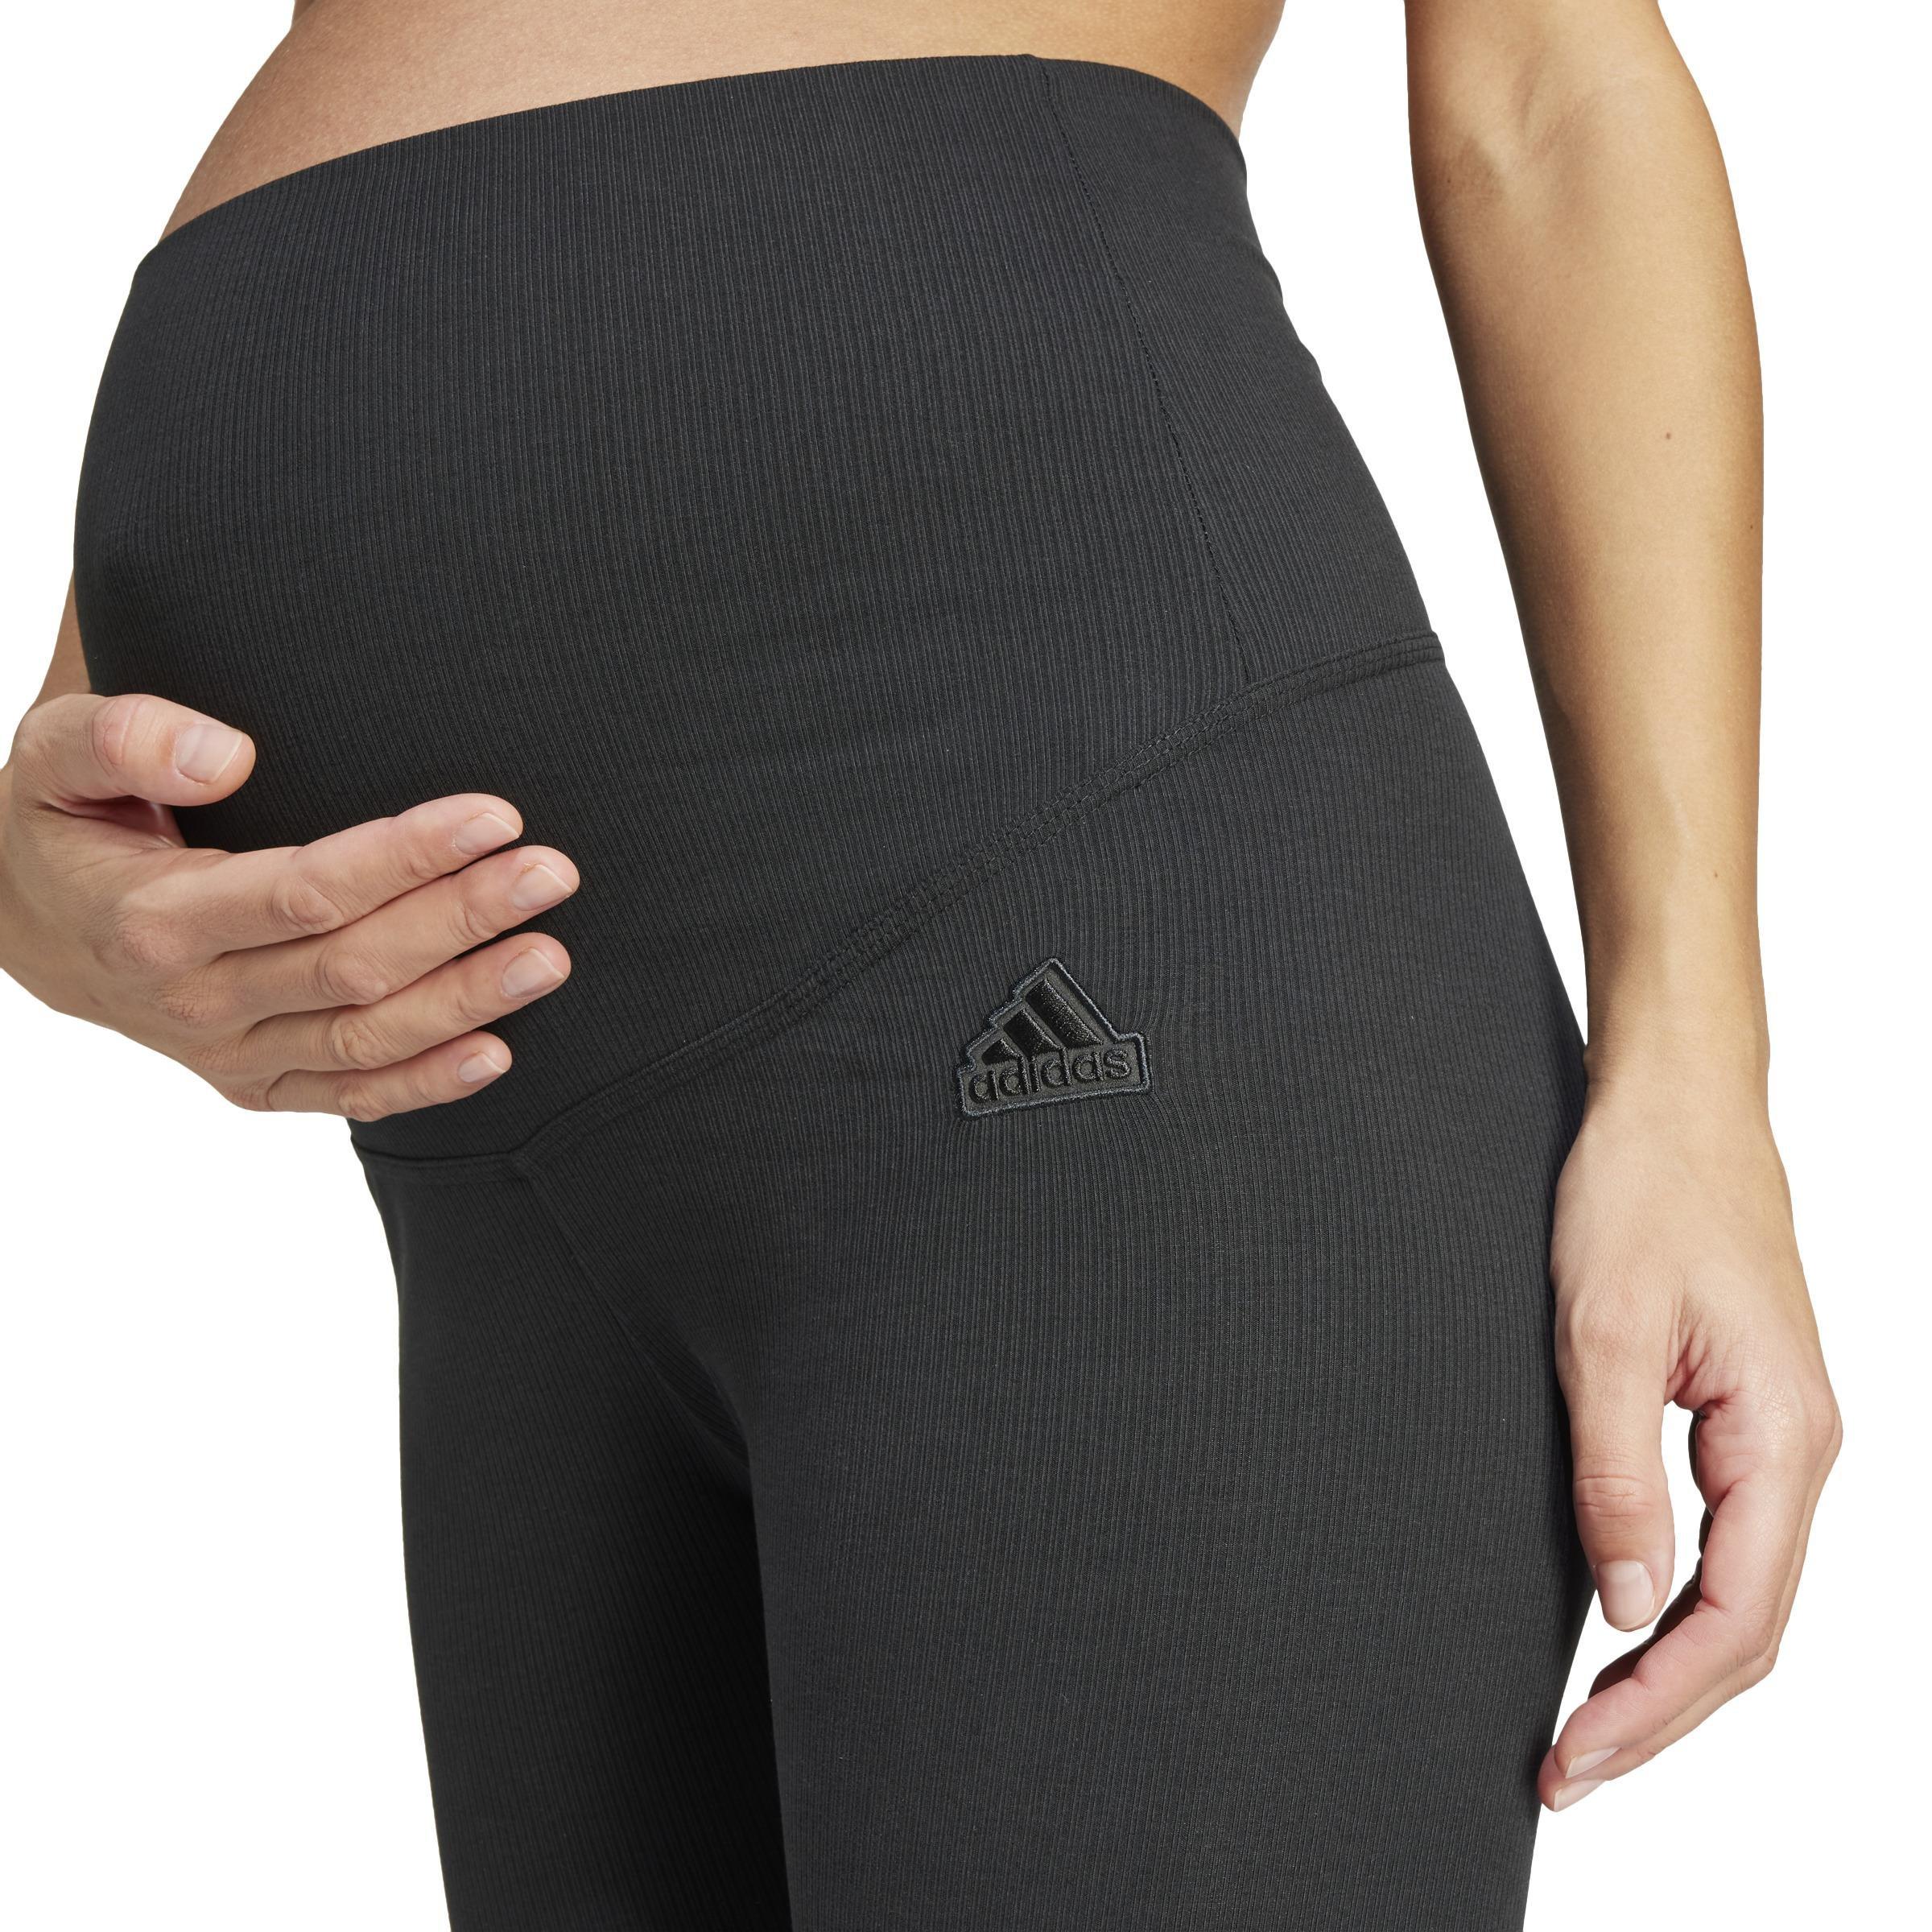 Active Life Black Striped Leggings Size M - $3 (88% Off Retail) - From Sarah